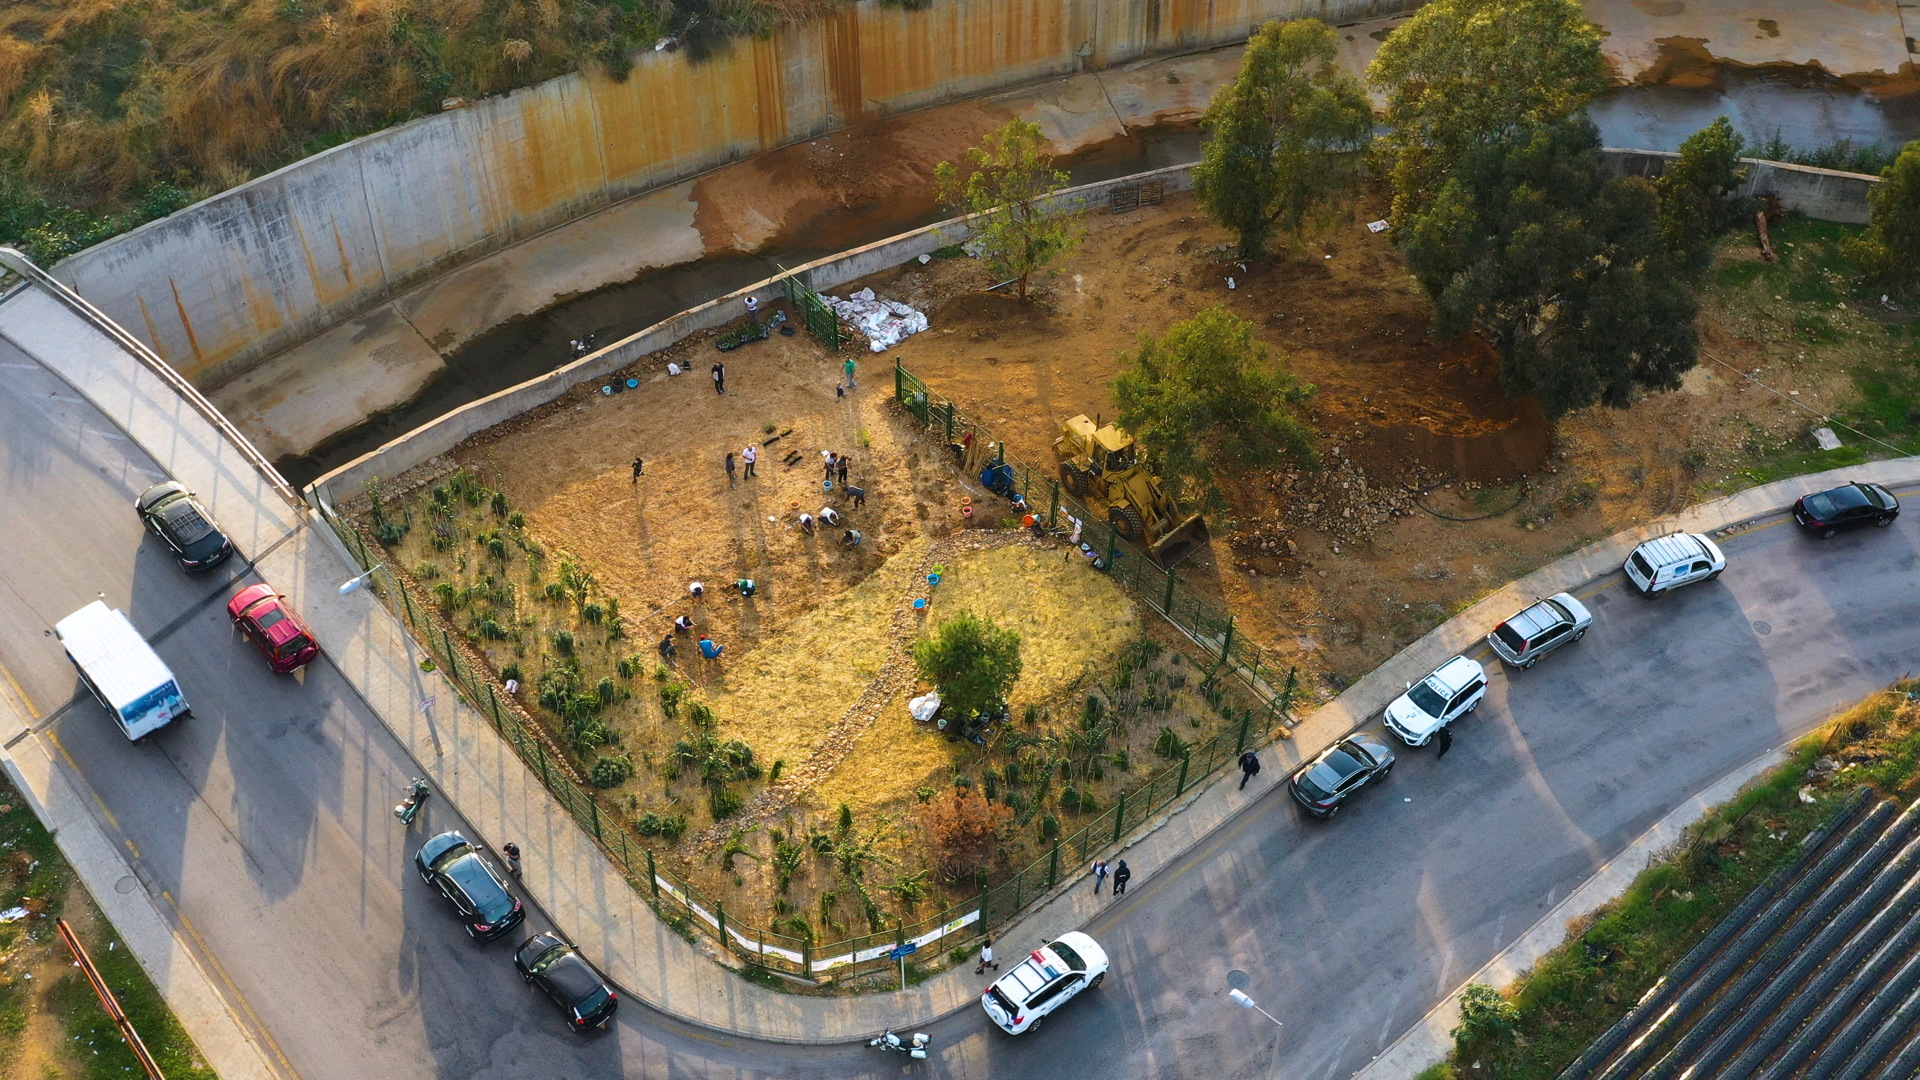 Beirut's RiverLESS Forest - Miyazaki tiny forests, project Sugi.